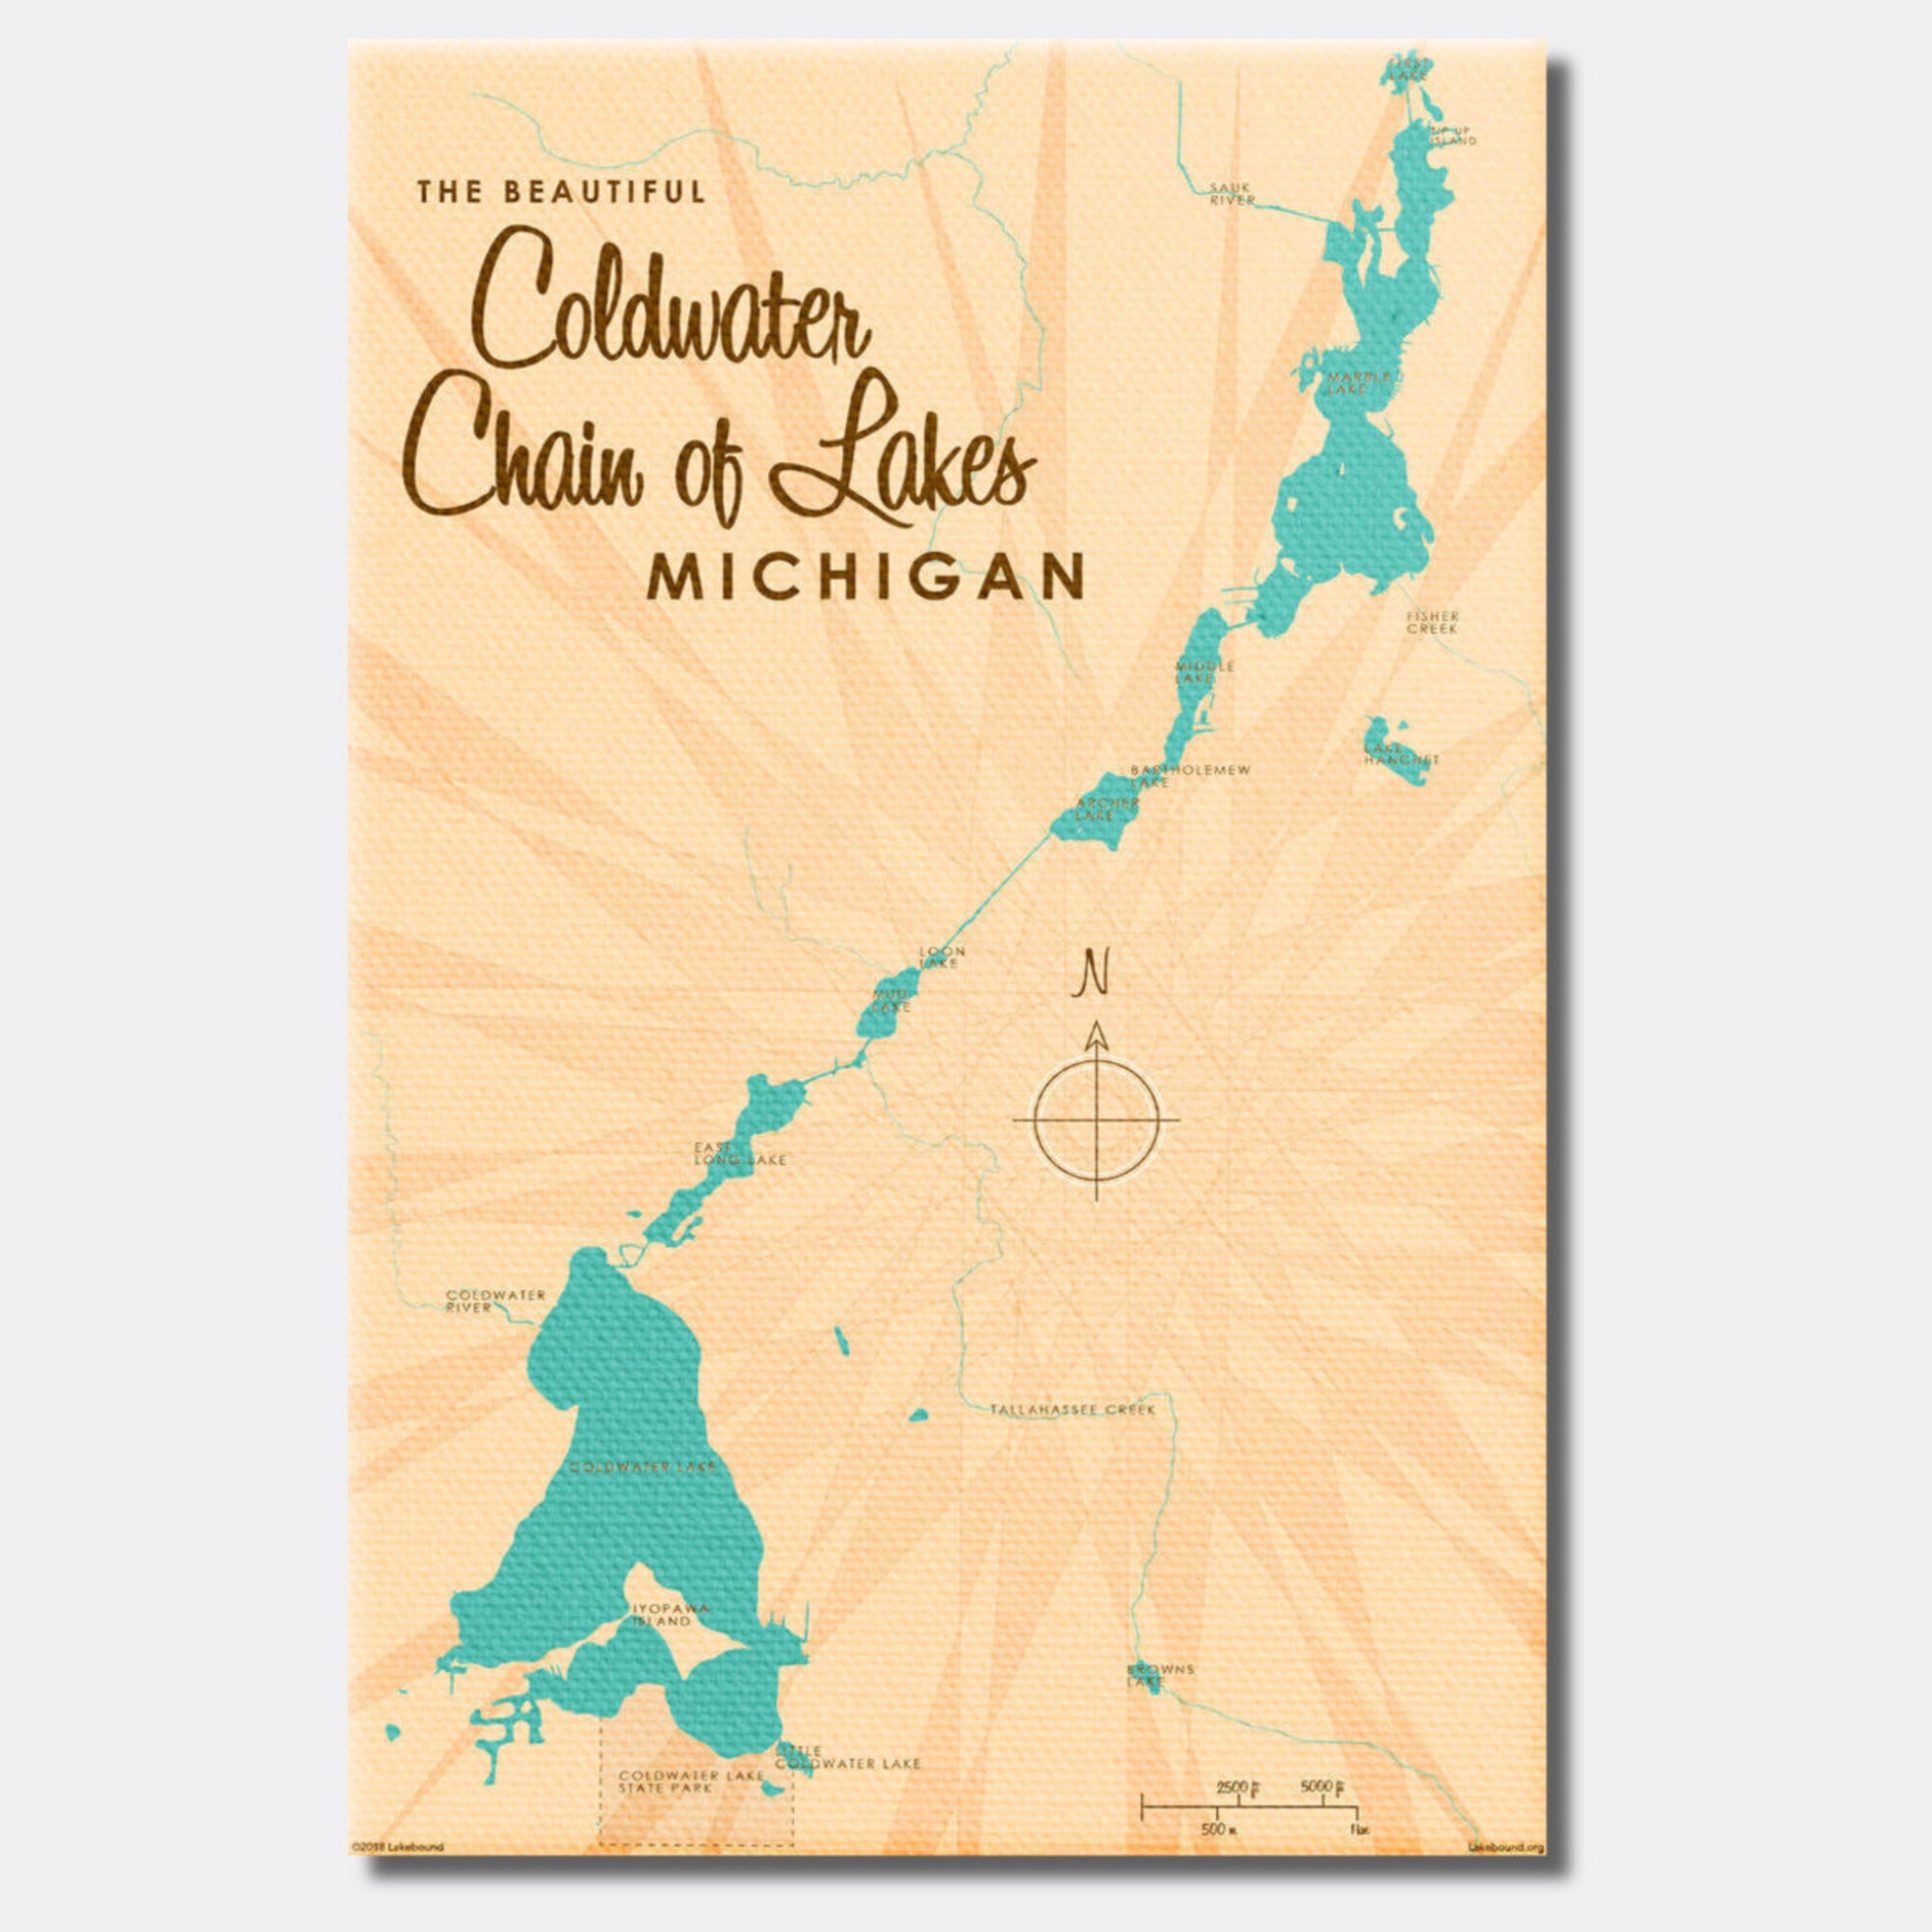 Coldwater Chain of Lakes Michigan, Canvas Print